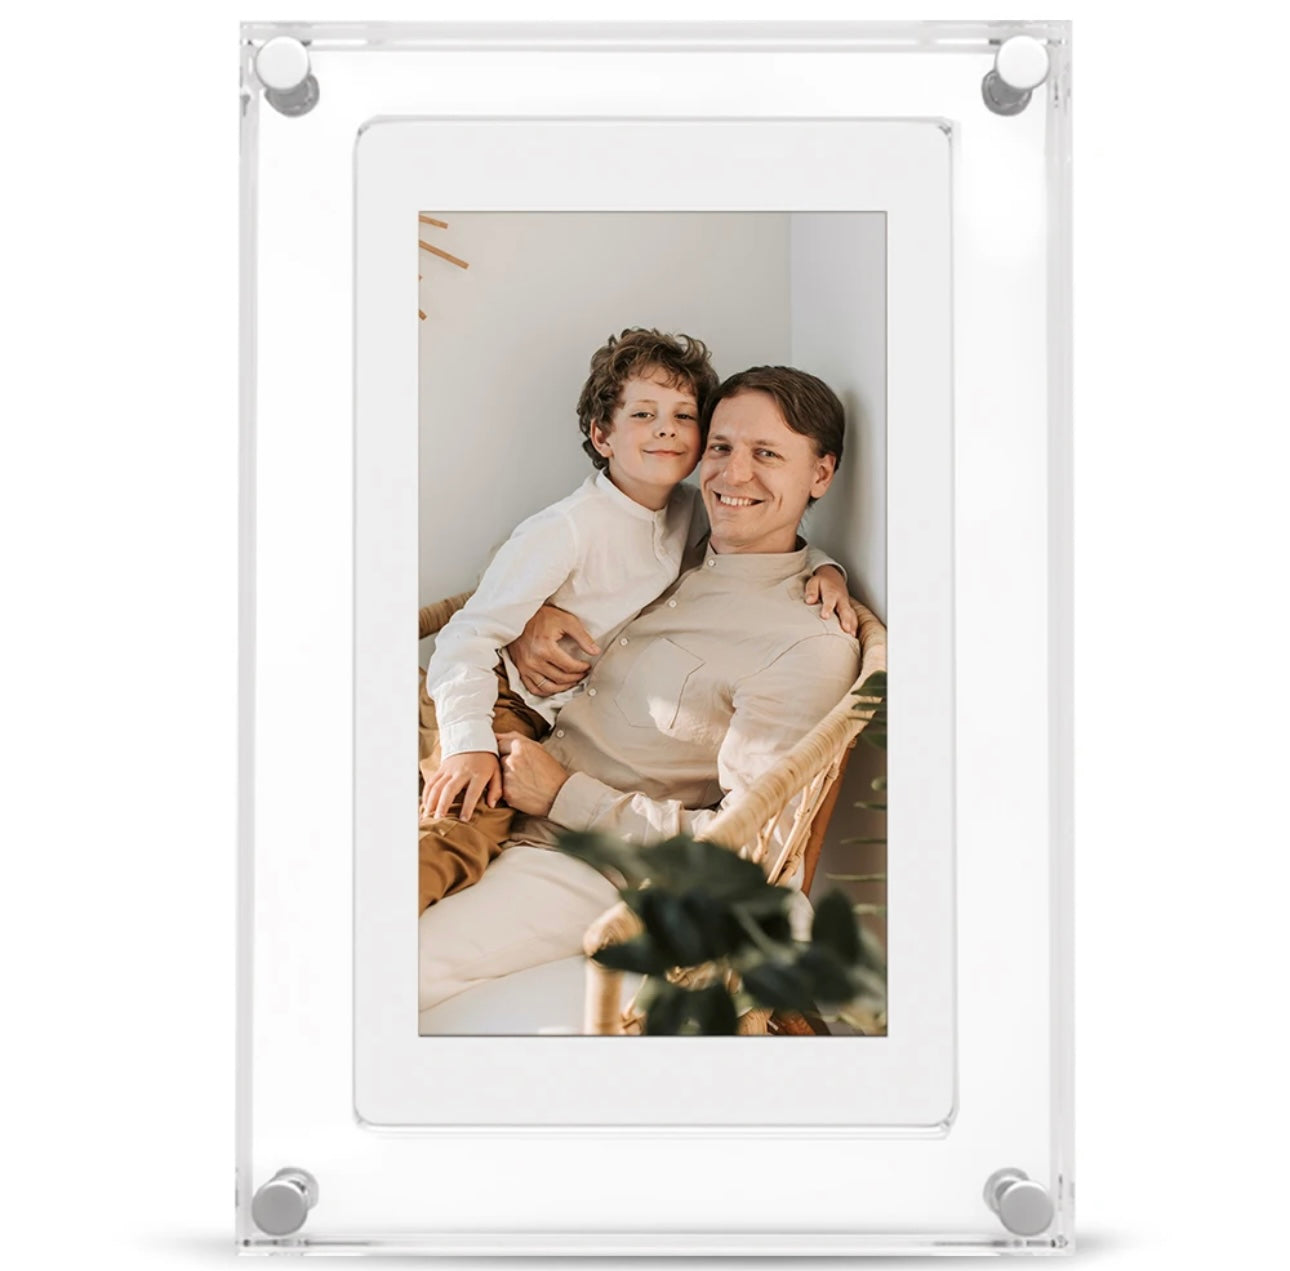 7 inch Acrylic Display Digital Picture Frame